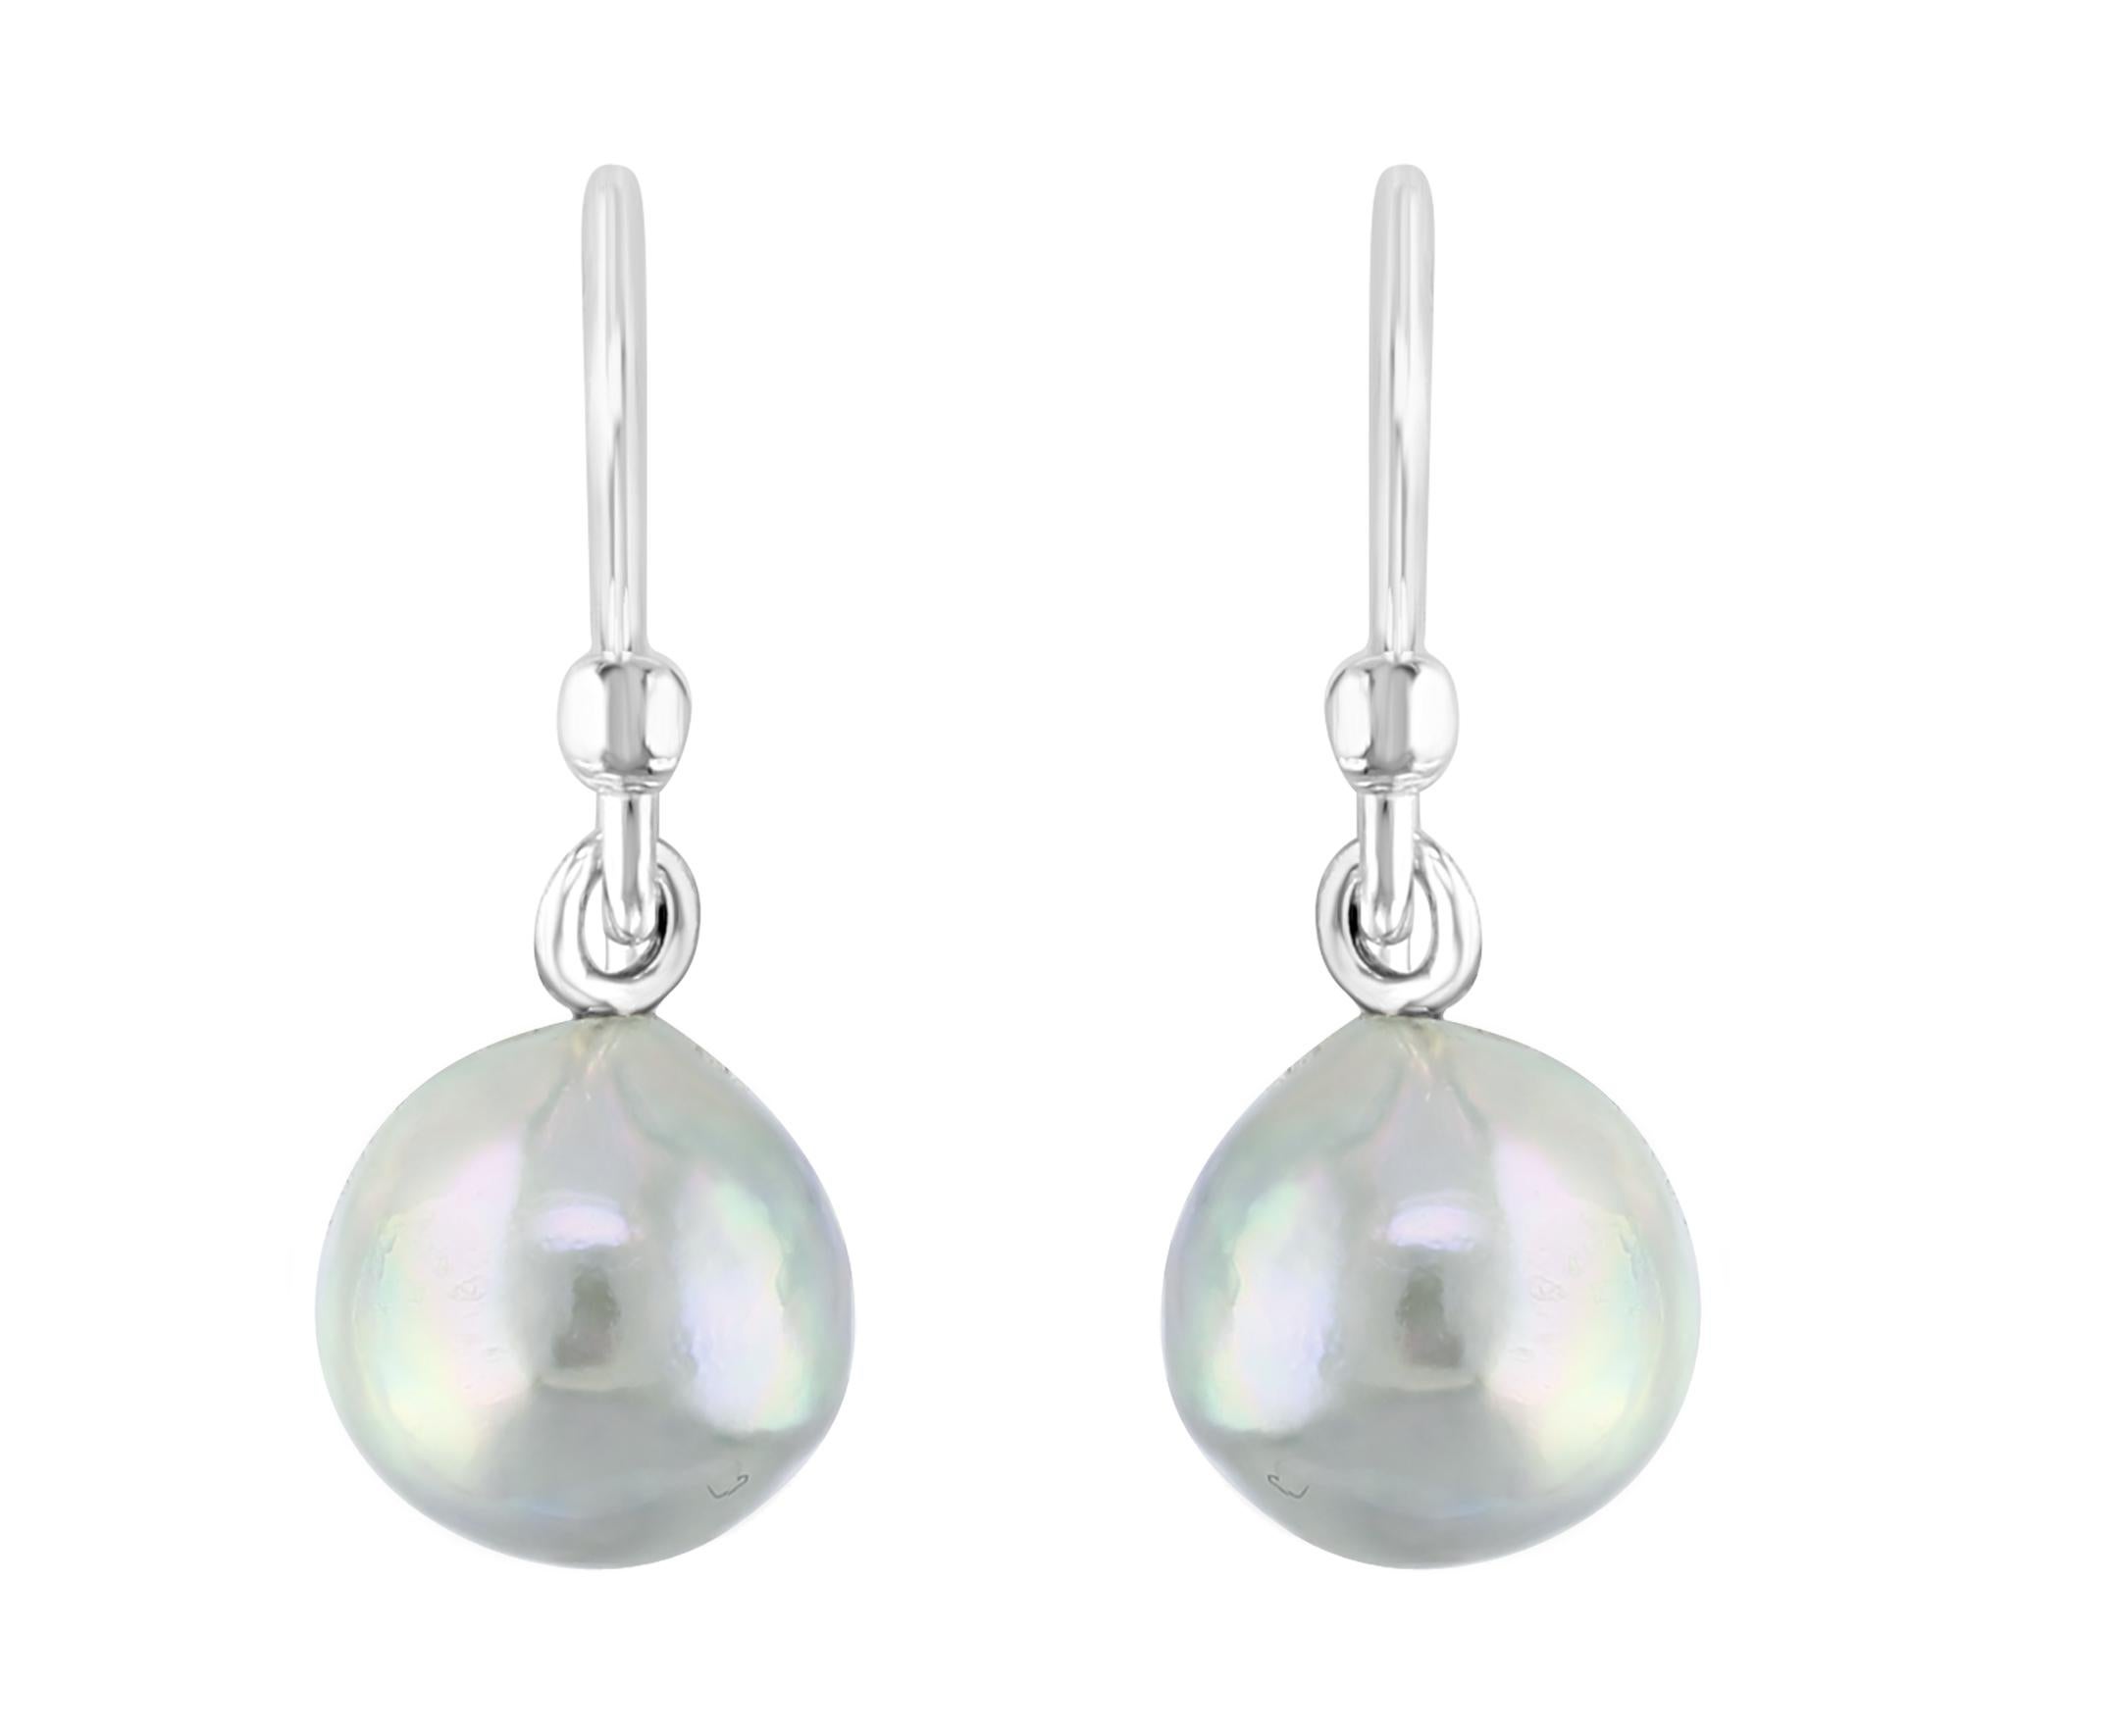 These beautiful dangling earrings feature  Akoya natural-color blue baroque pearls that measure 7.-5-8mm. The pearls hang from sterling silver ear wires.  Simple, yet elegant, this style is a must for any collection.

AN ELEGANT EXPRESSION – This